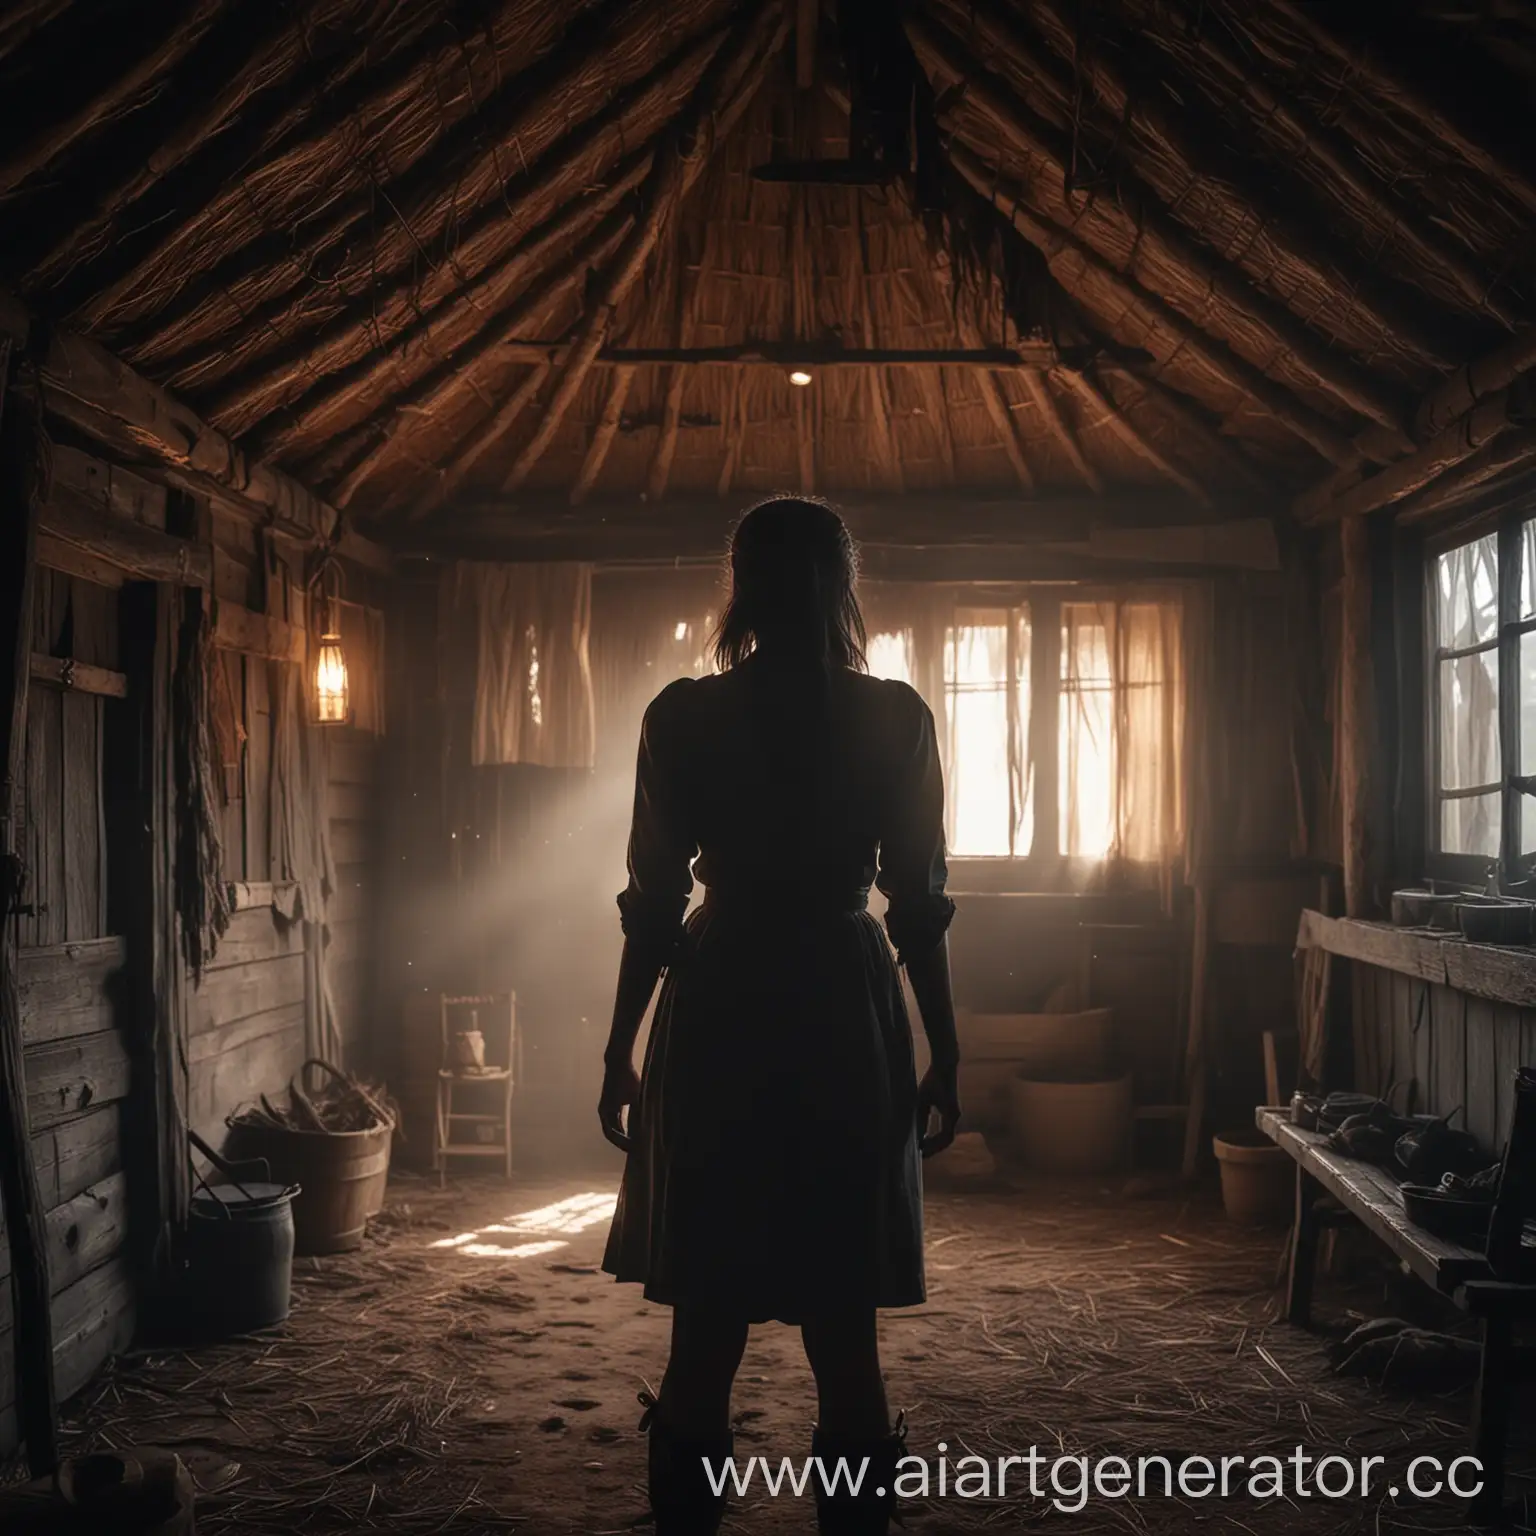 Show the sinister atmosphere inside the hut and the girl Anna. 4K cinematic